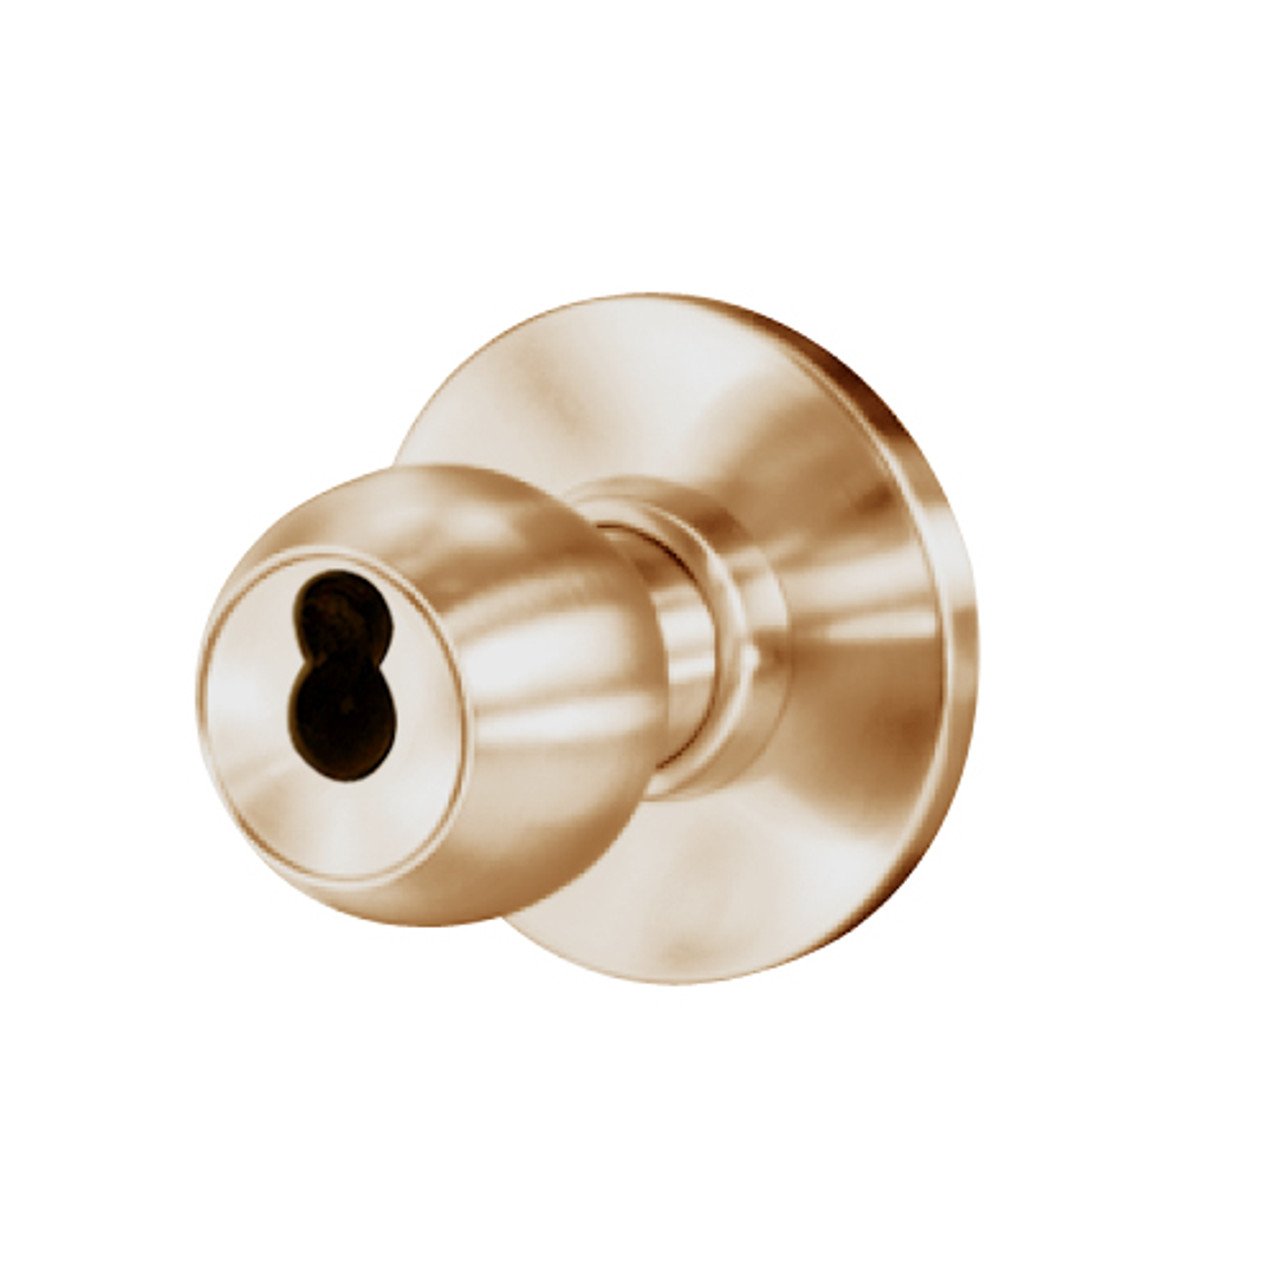 8K37S4AS3612 Best 8K Series Communicating Heavy Duty Cylindrical Knob Locks with Round Style in Satin Bronze